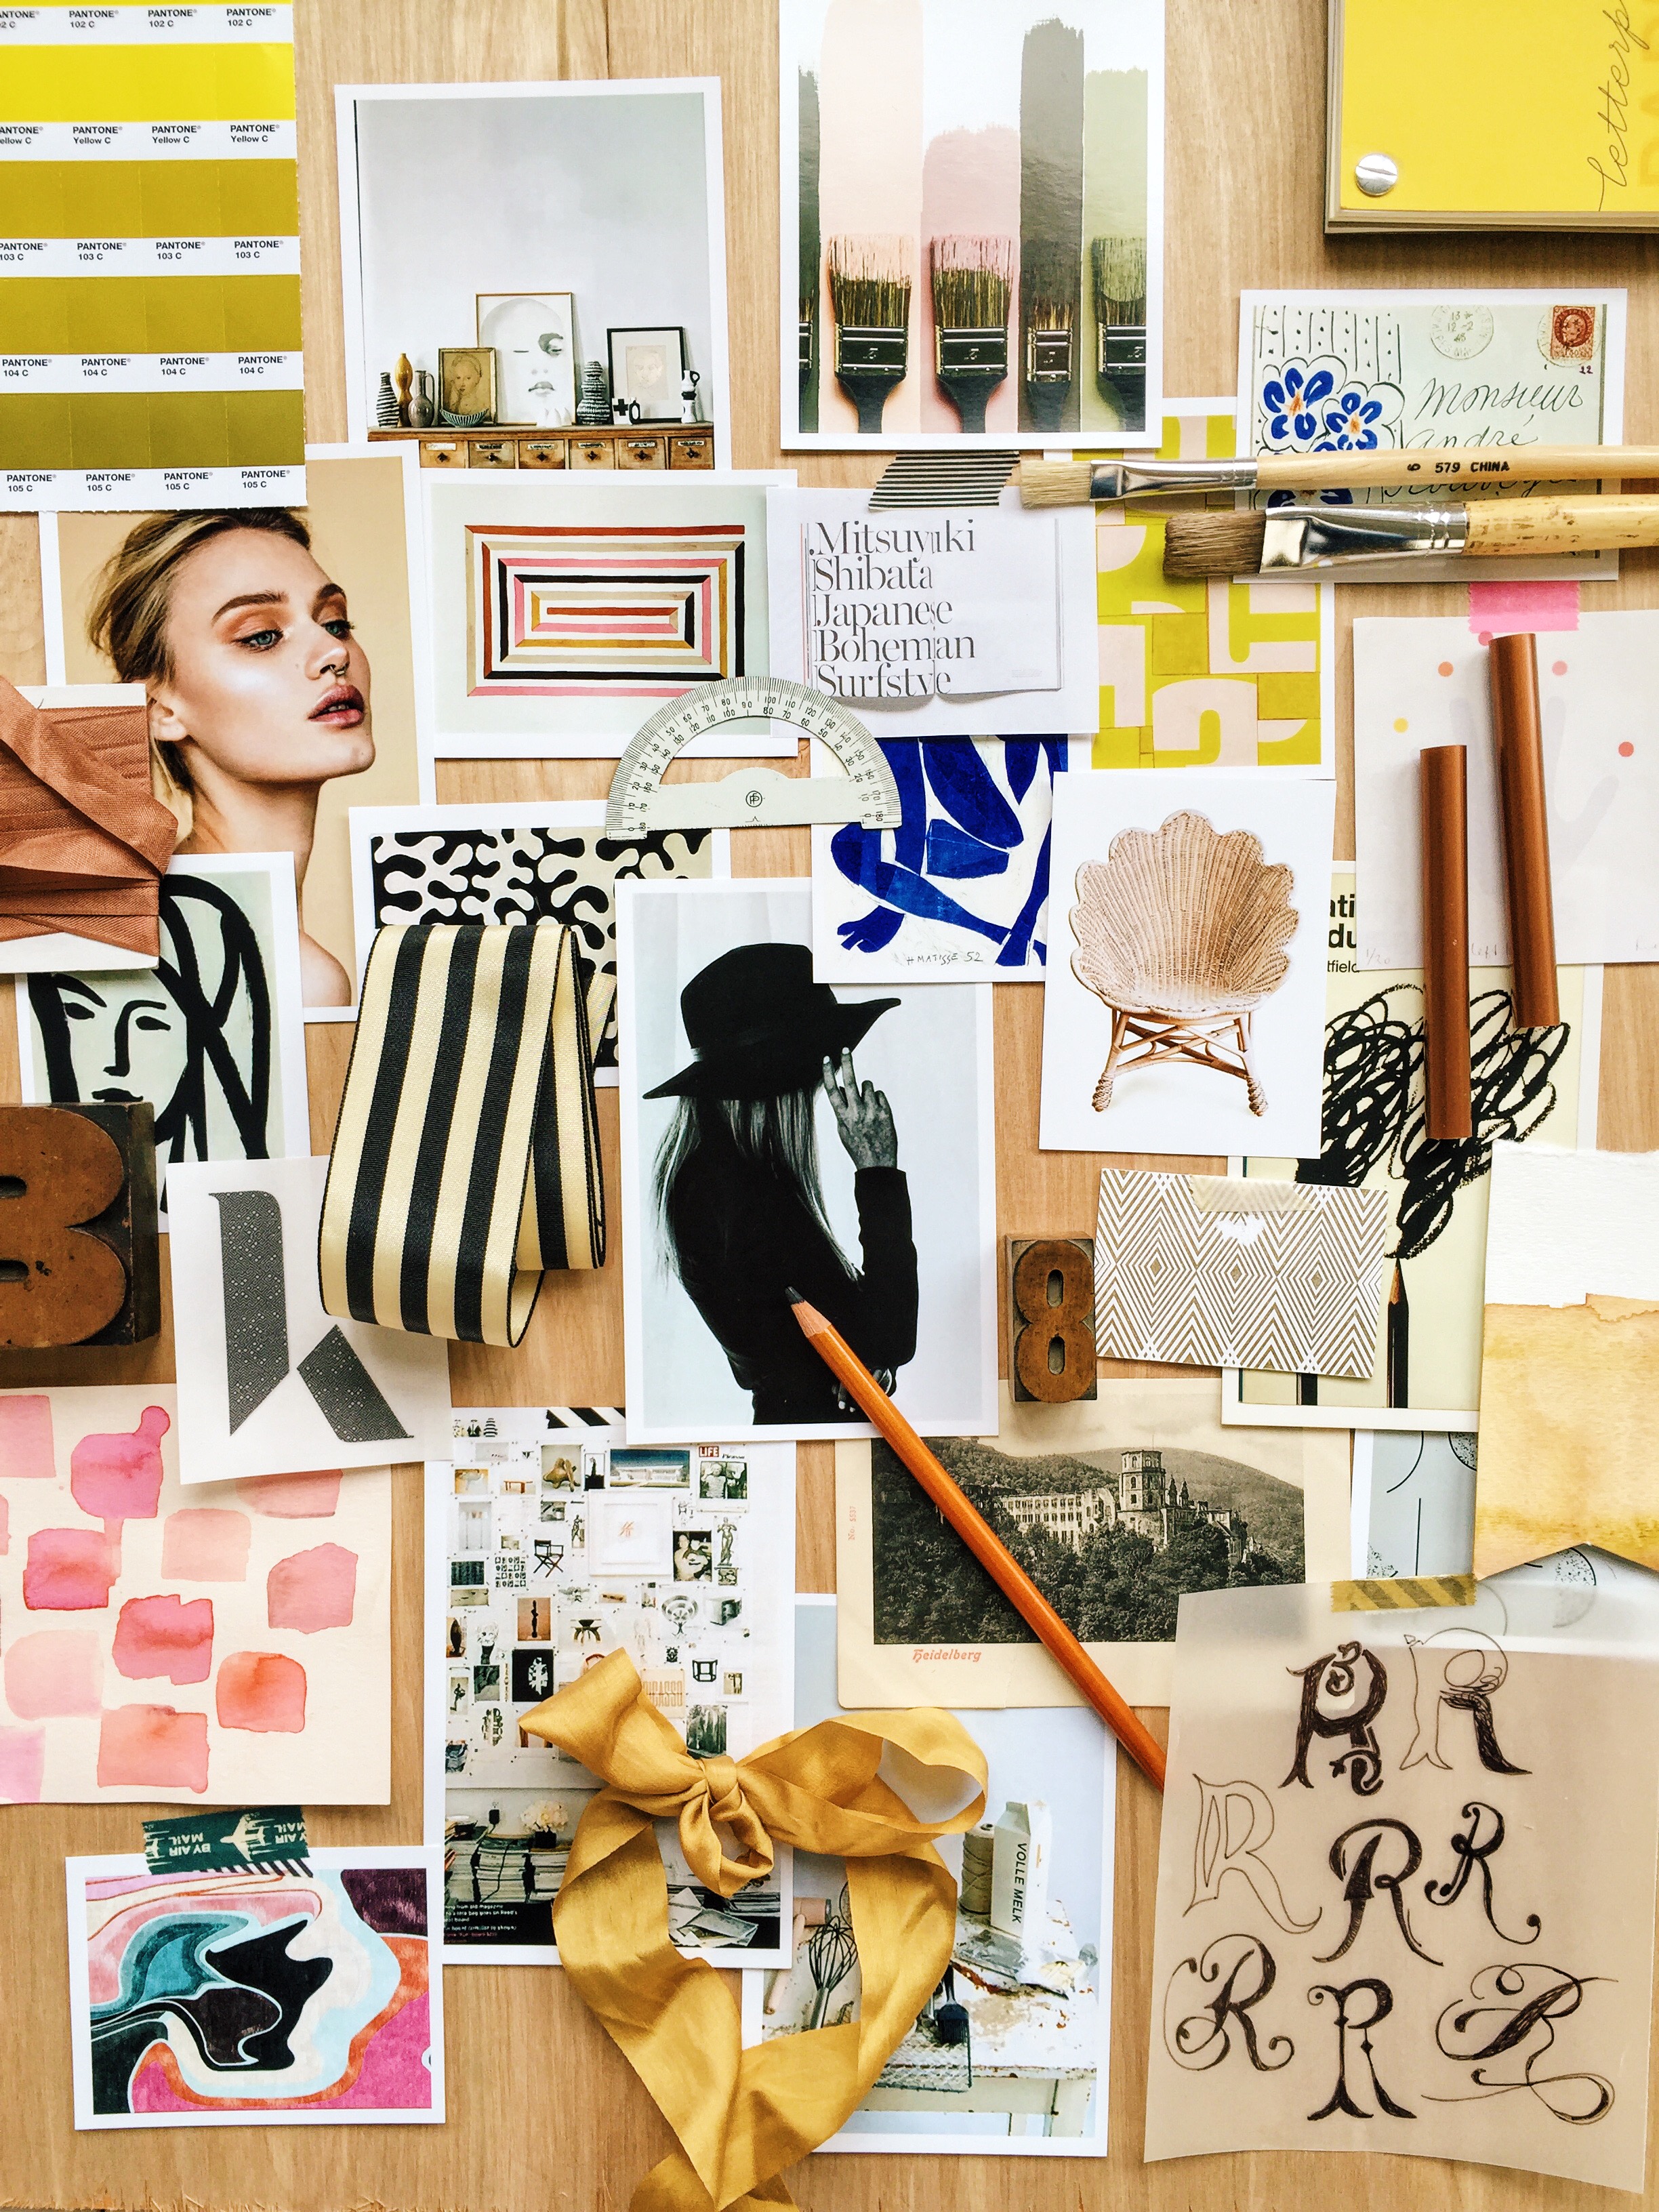 How to make a style board - The House That Lars Built